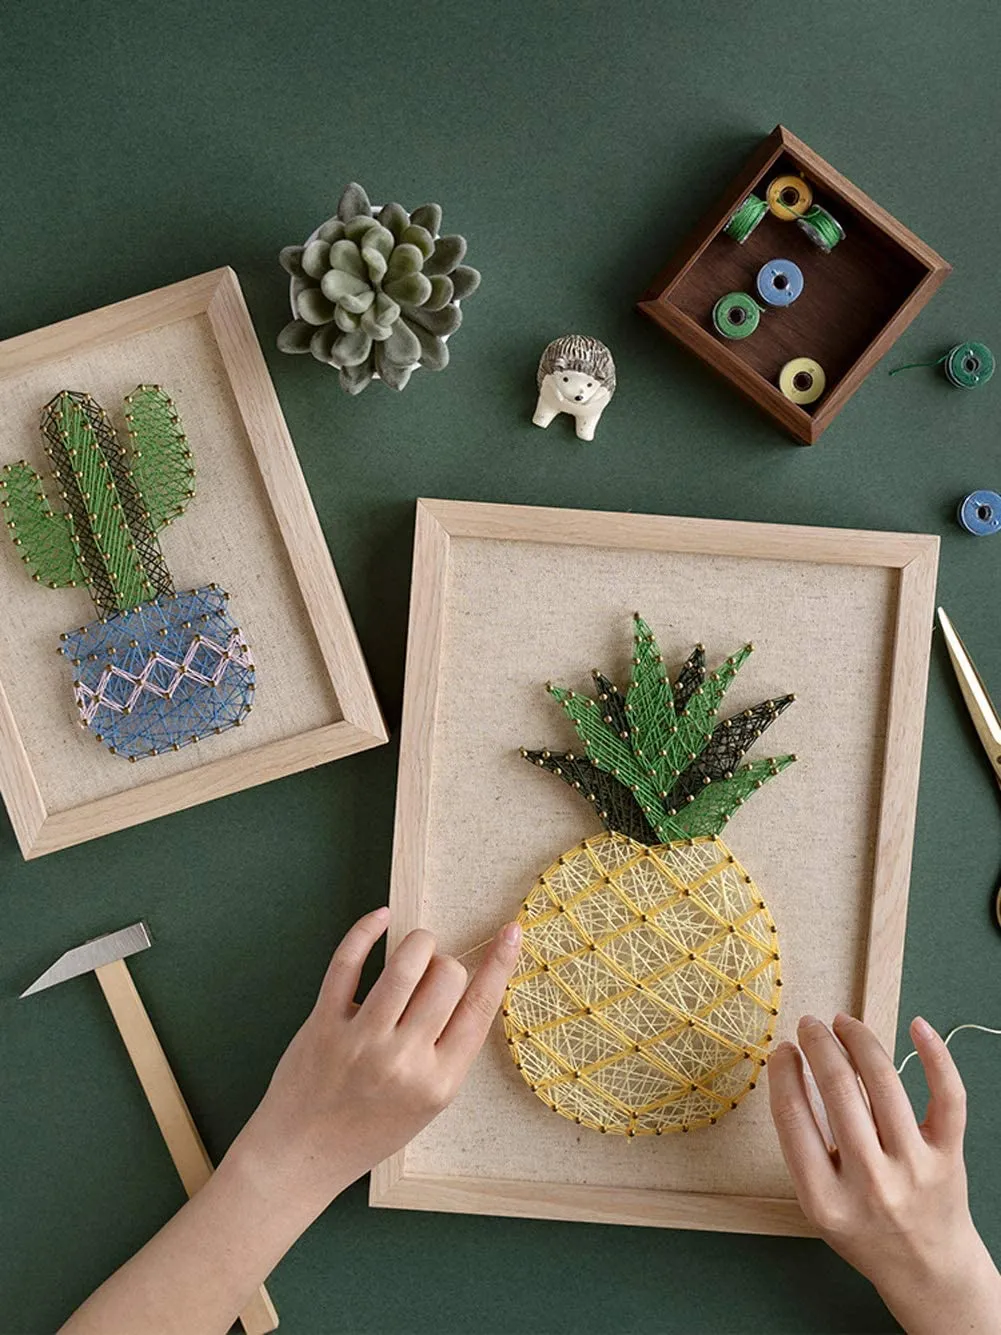 42 of the best craft ideas & DIYs for teens and tweens! - Gathered